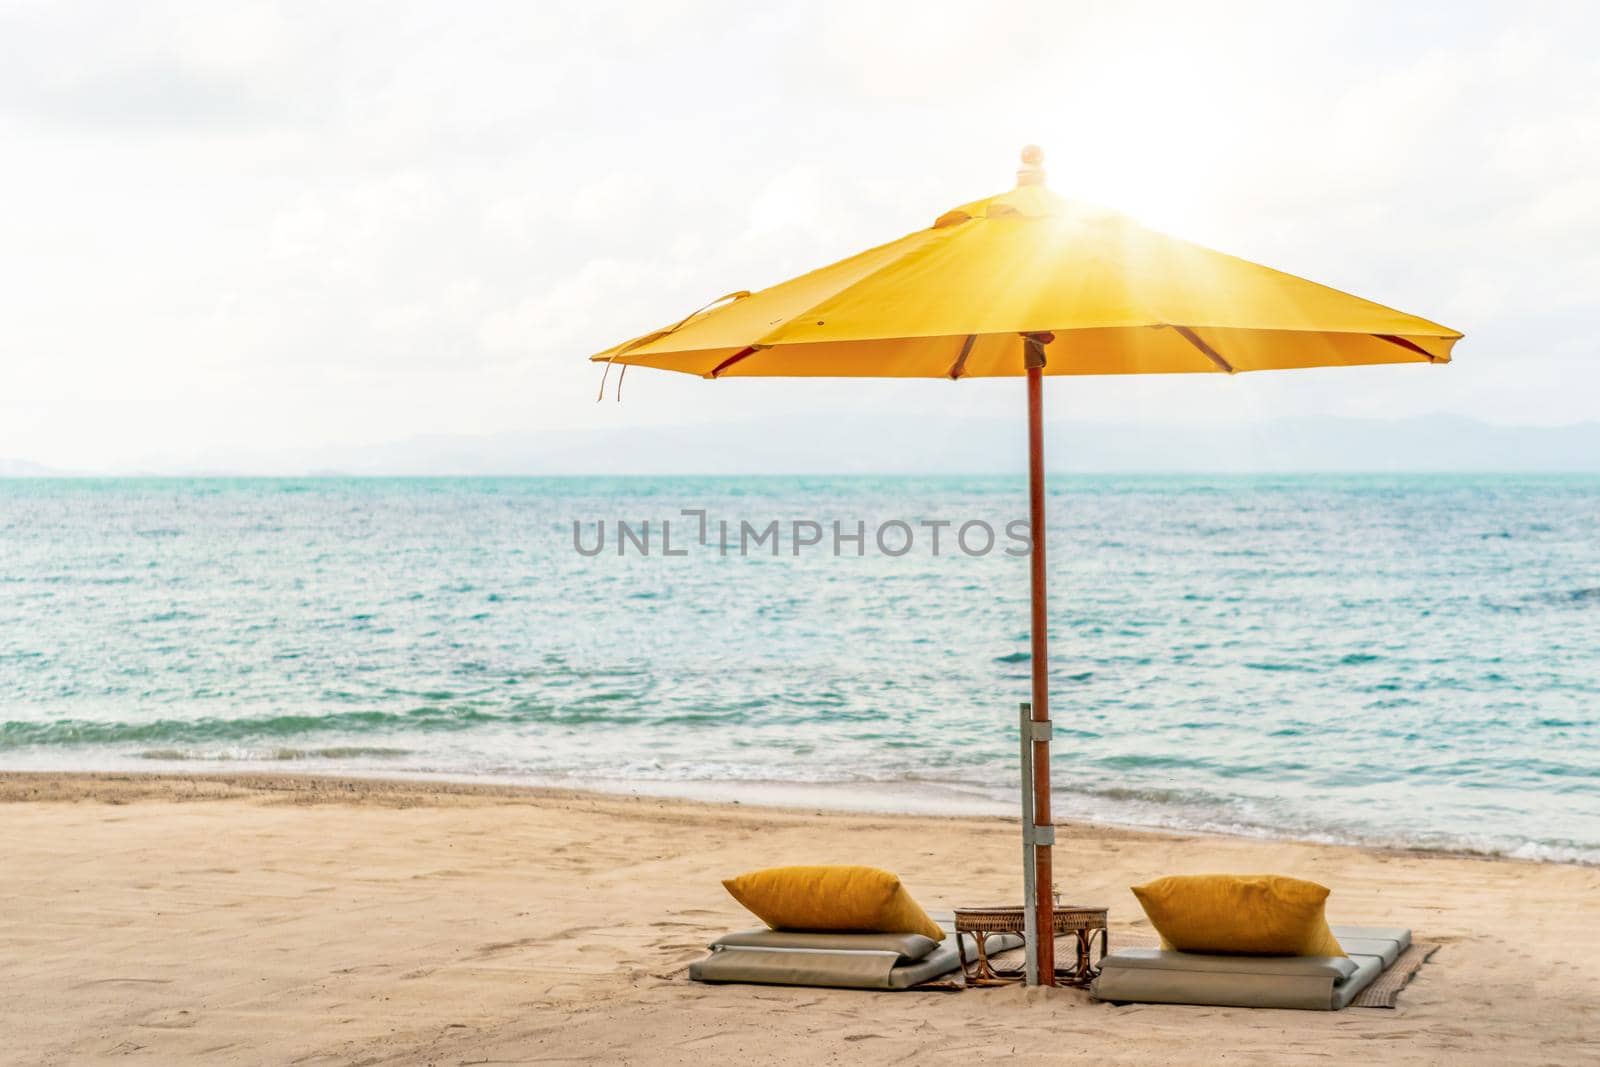 Umbrella and chair at tropical summer beach background with copy space blue sky